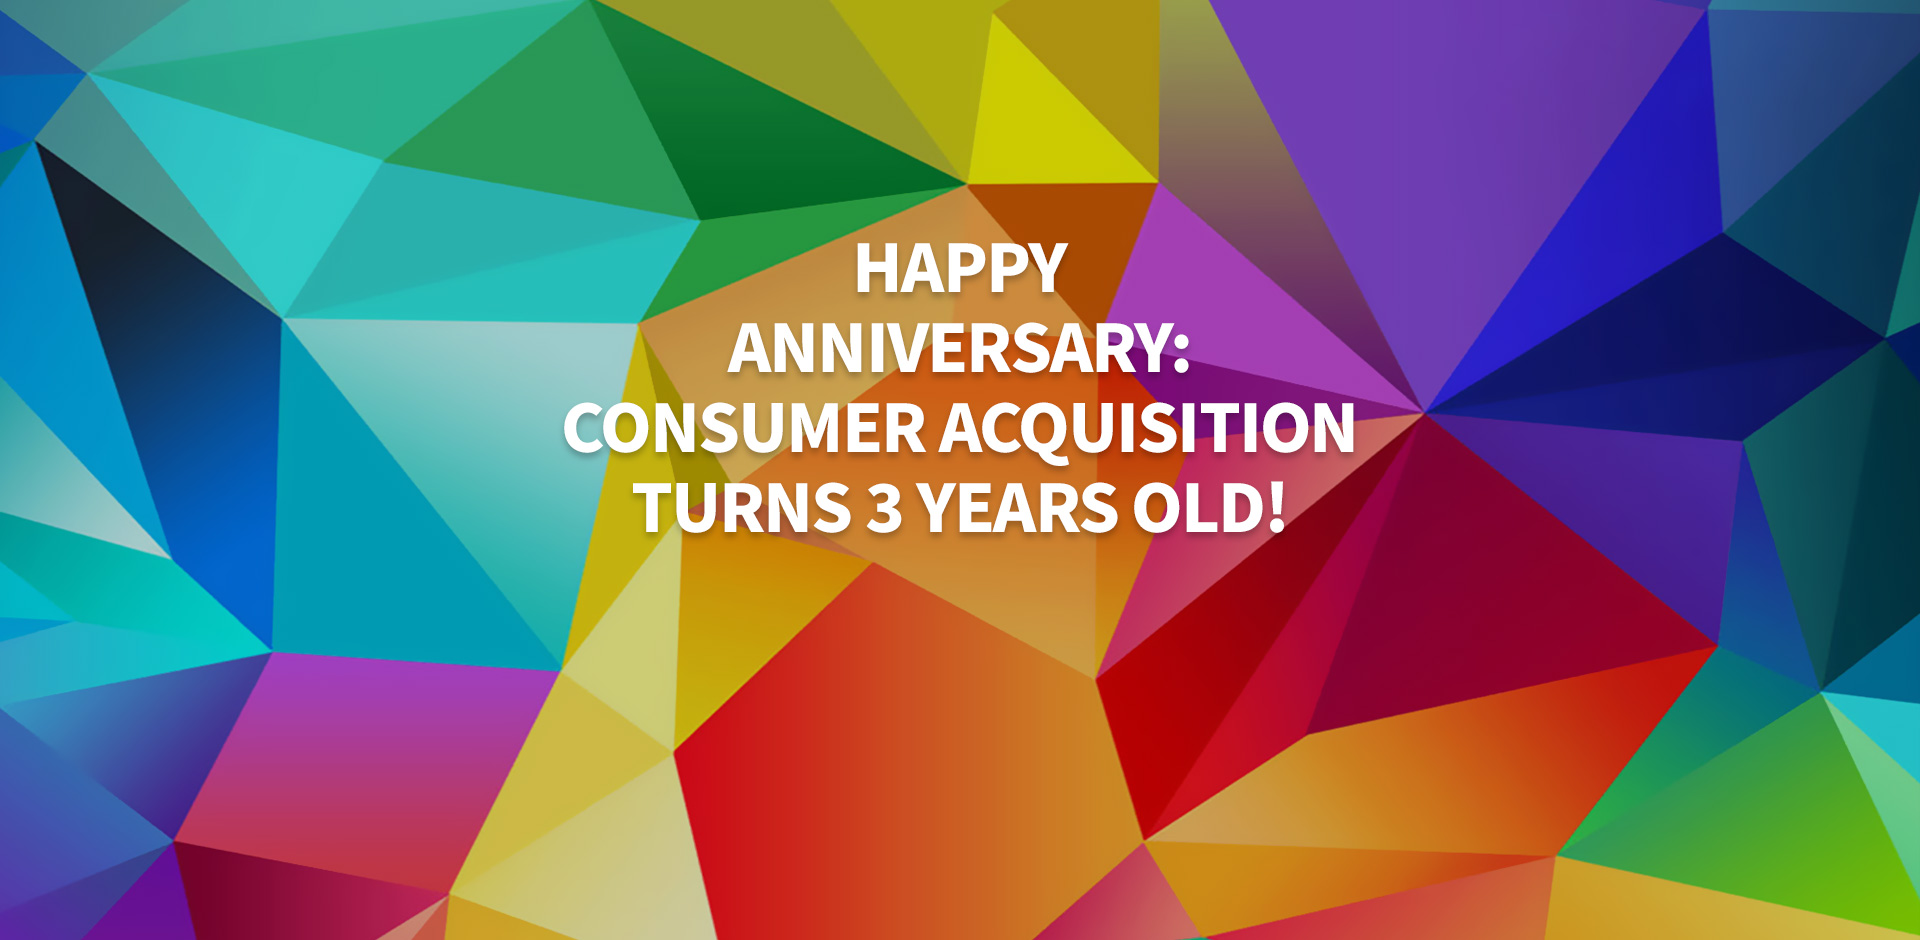 Happy Anniversary: Consumer Acquisition Turns 3 Years Old!